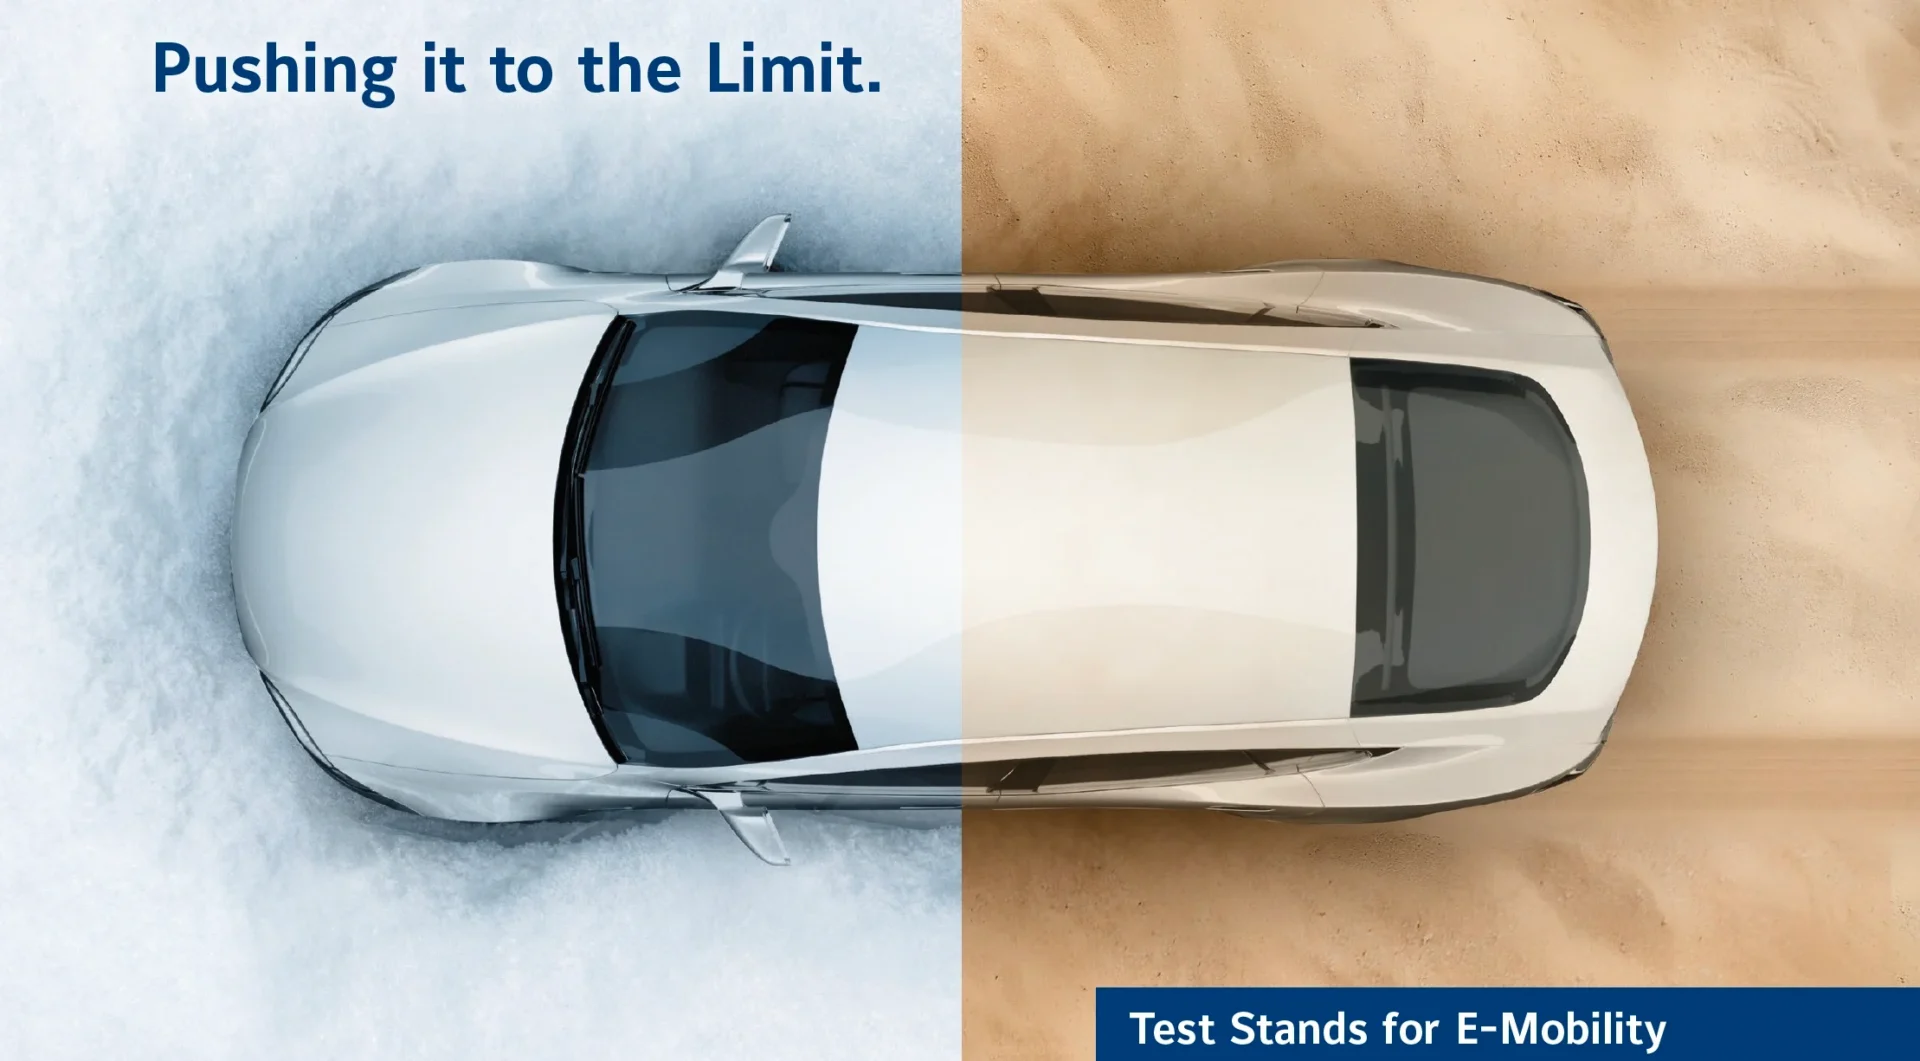 Pushing it to the limit. Test stands for e-mobility components.